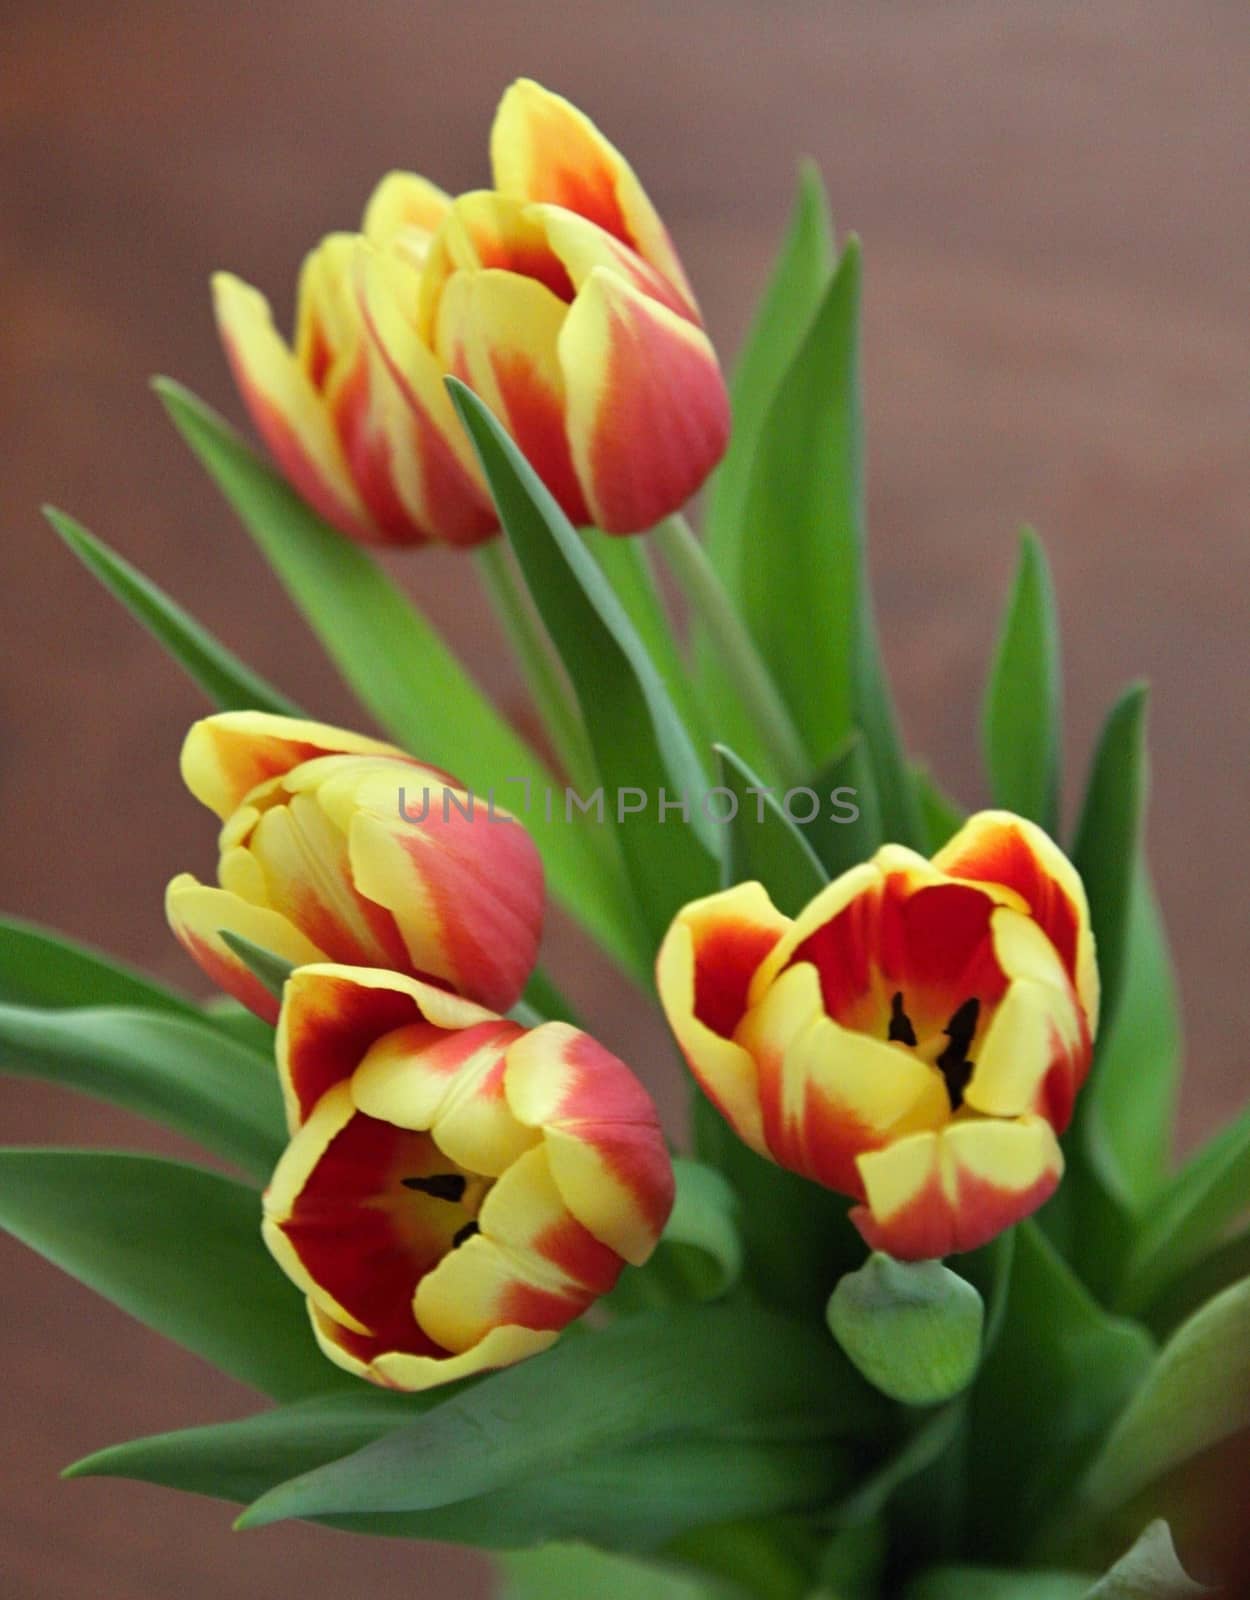 Bouquet of yellow and orange tulips with green leafs